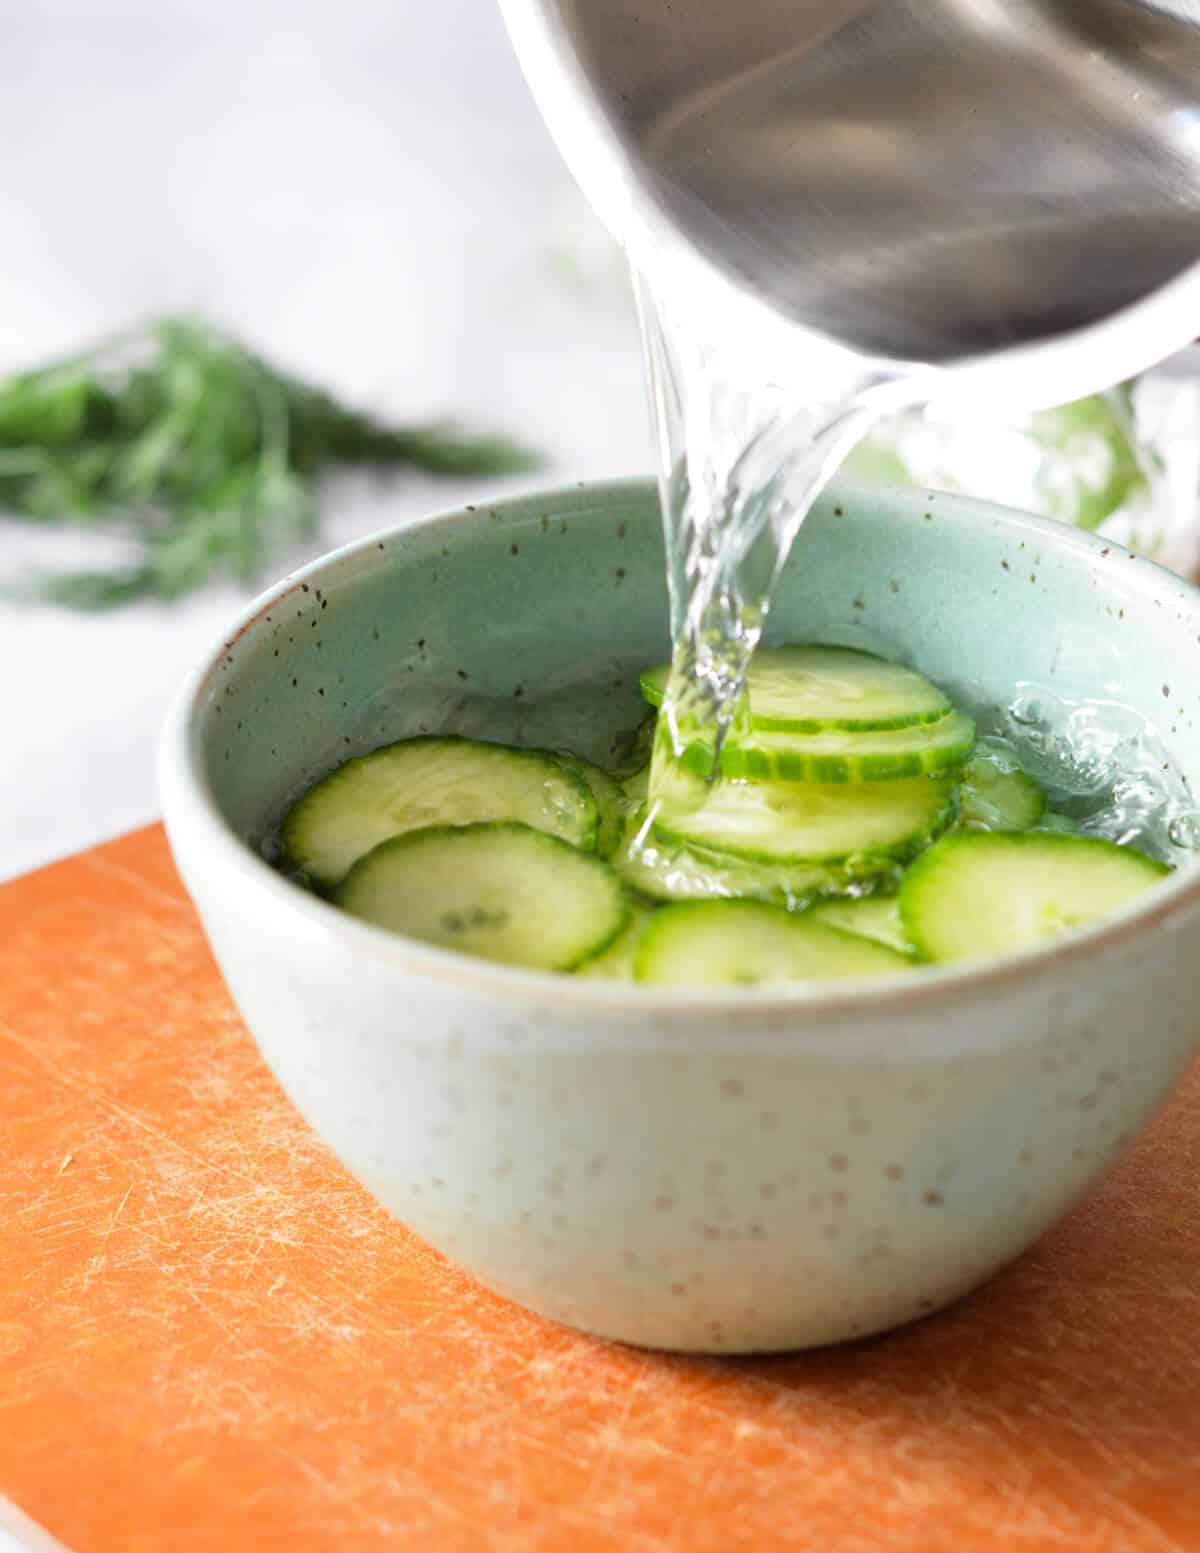 pouring hot vinegar over cucumber slices.